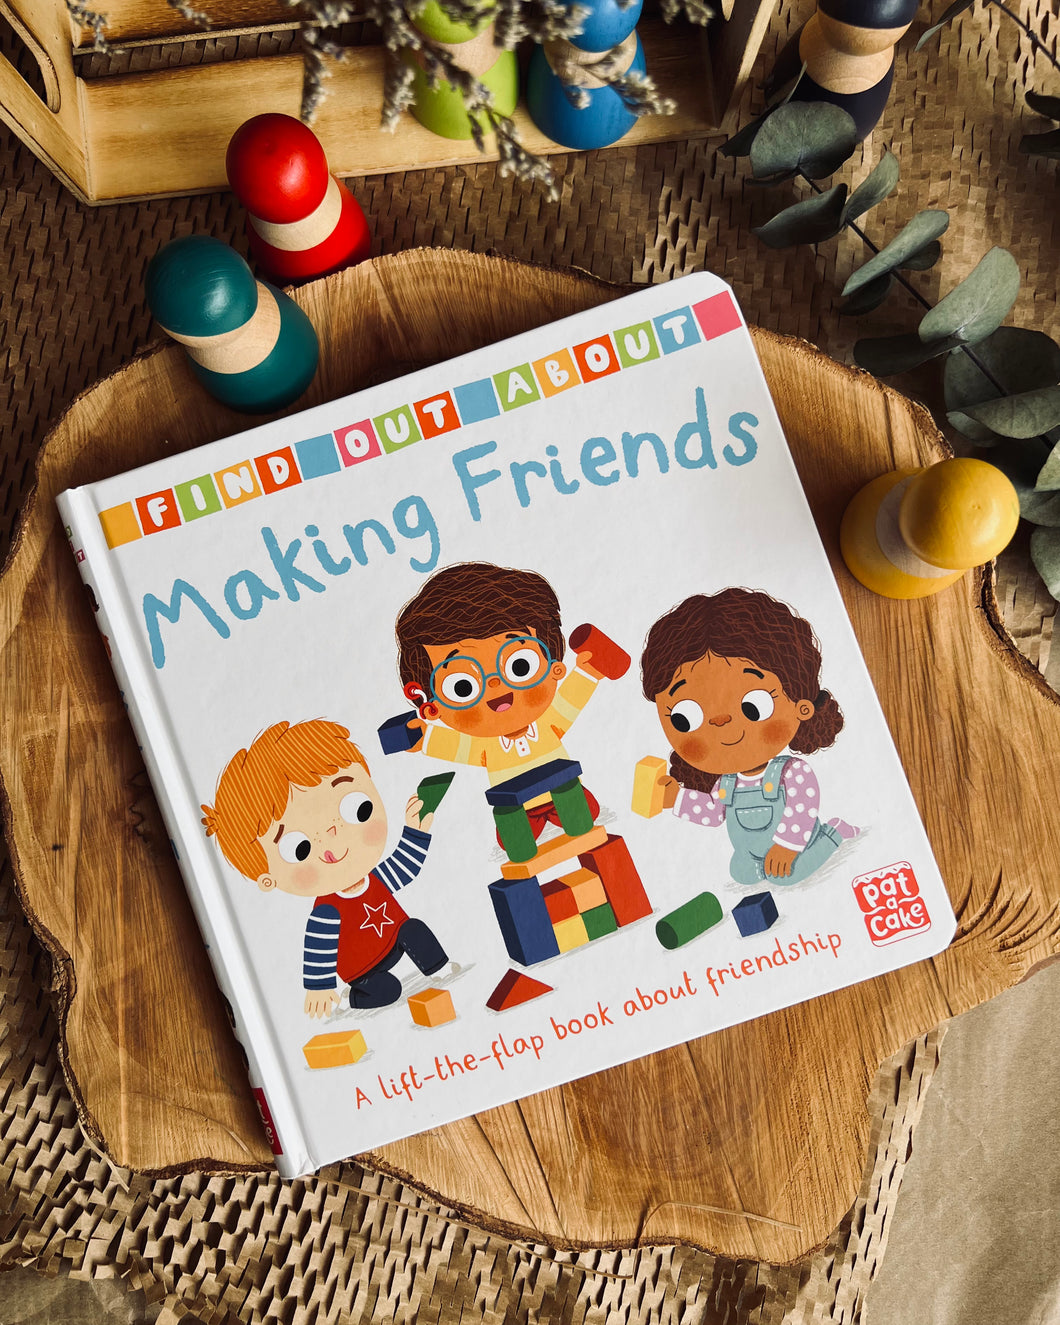 Find out about Making Friends